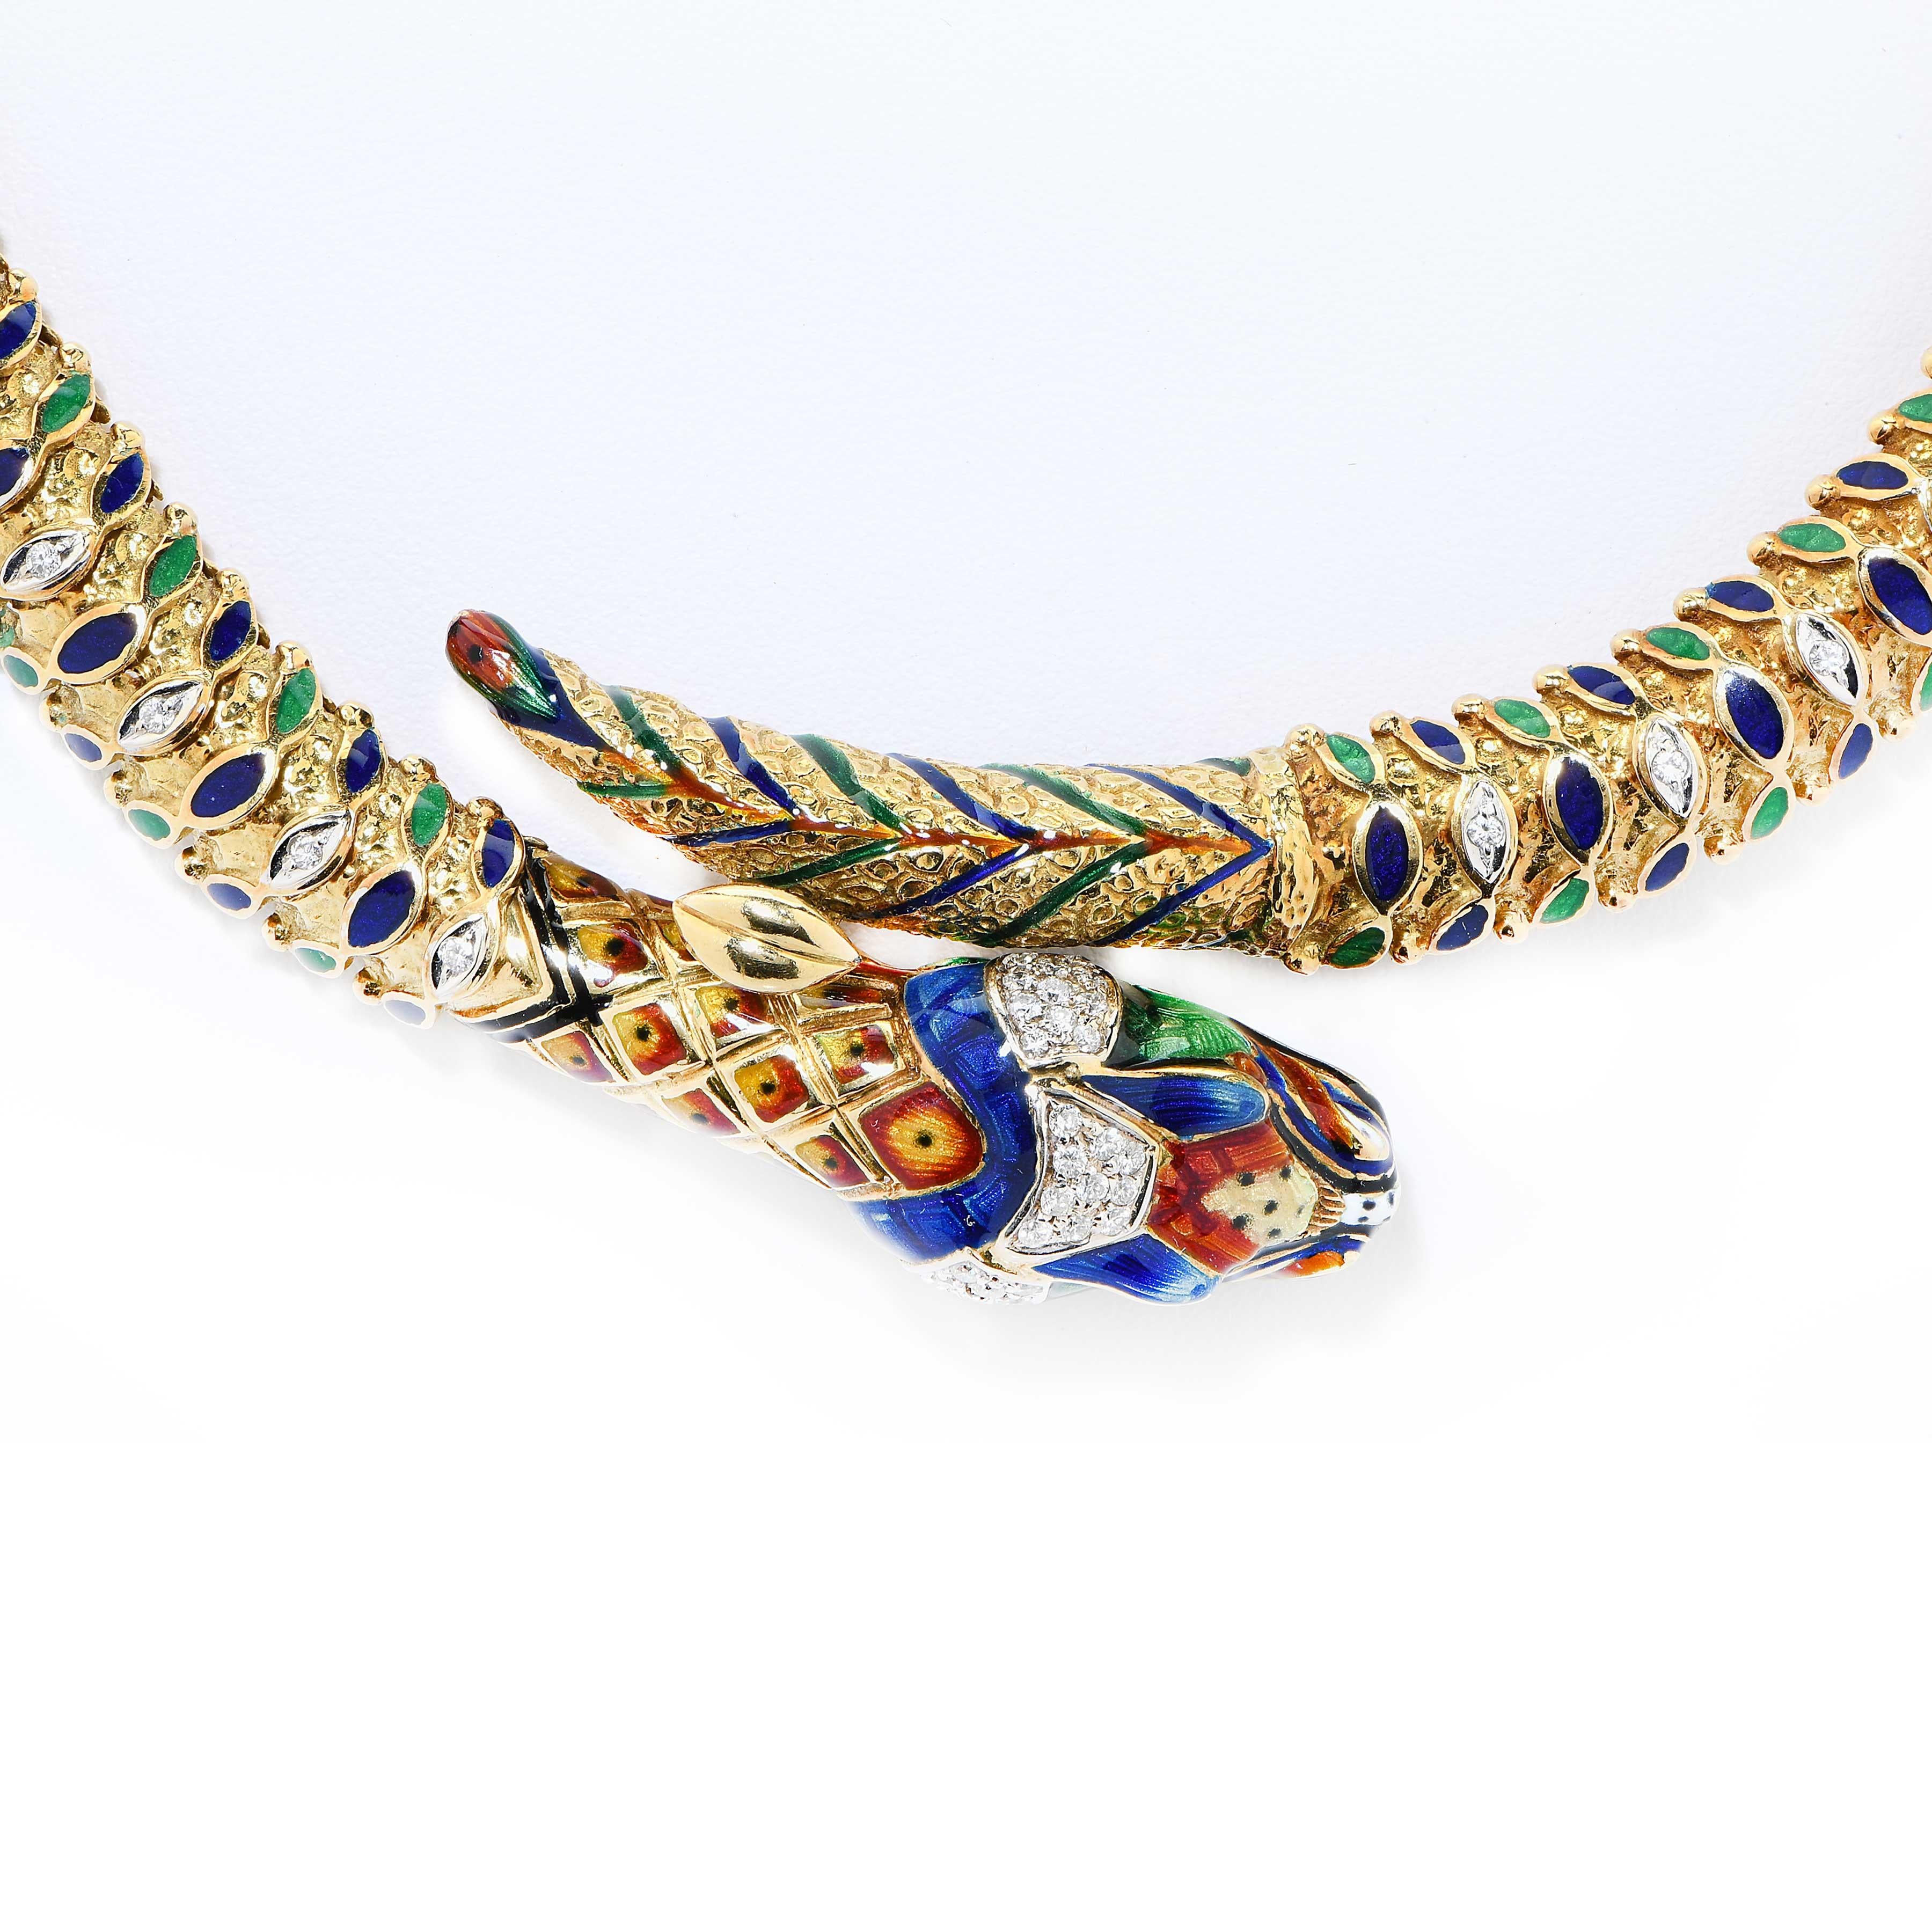 Snake Necklace with Diamonds and Enamel in 18 Karat Yellow Gold
This masterfully crafted 18 Karat Yellow Gold articulated snake necklace features fine enamel work and 82 round brilliant cut diamonds with an estimated total weight of 1 carat. 
Metal